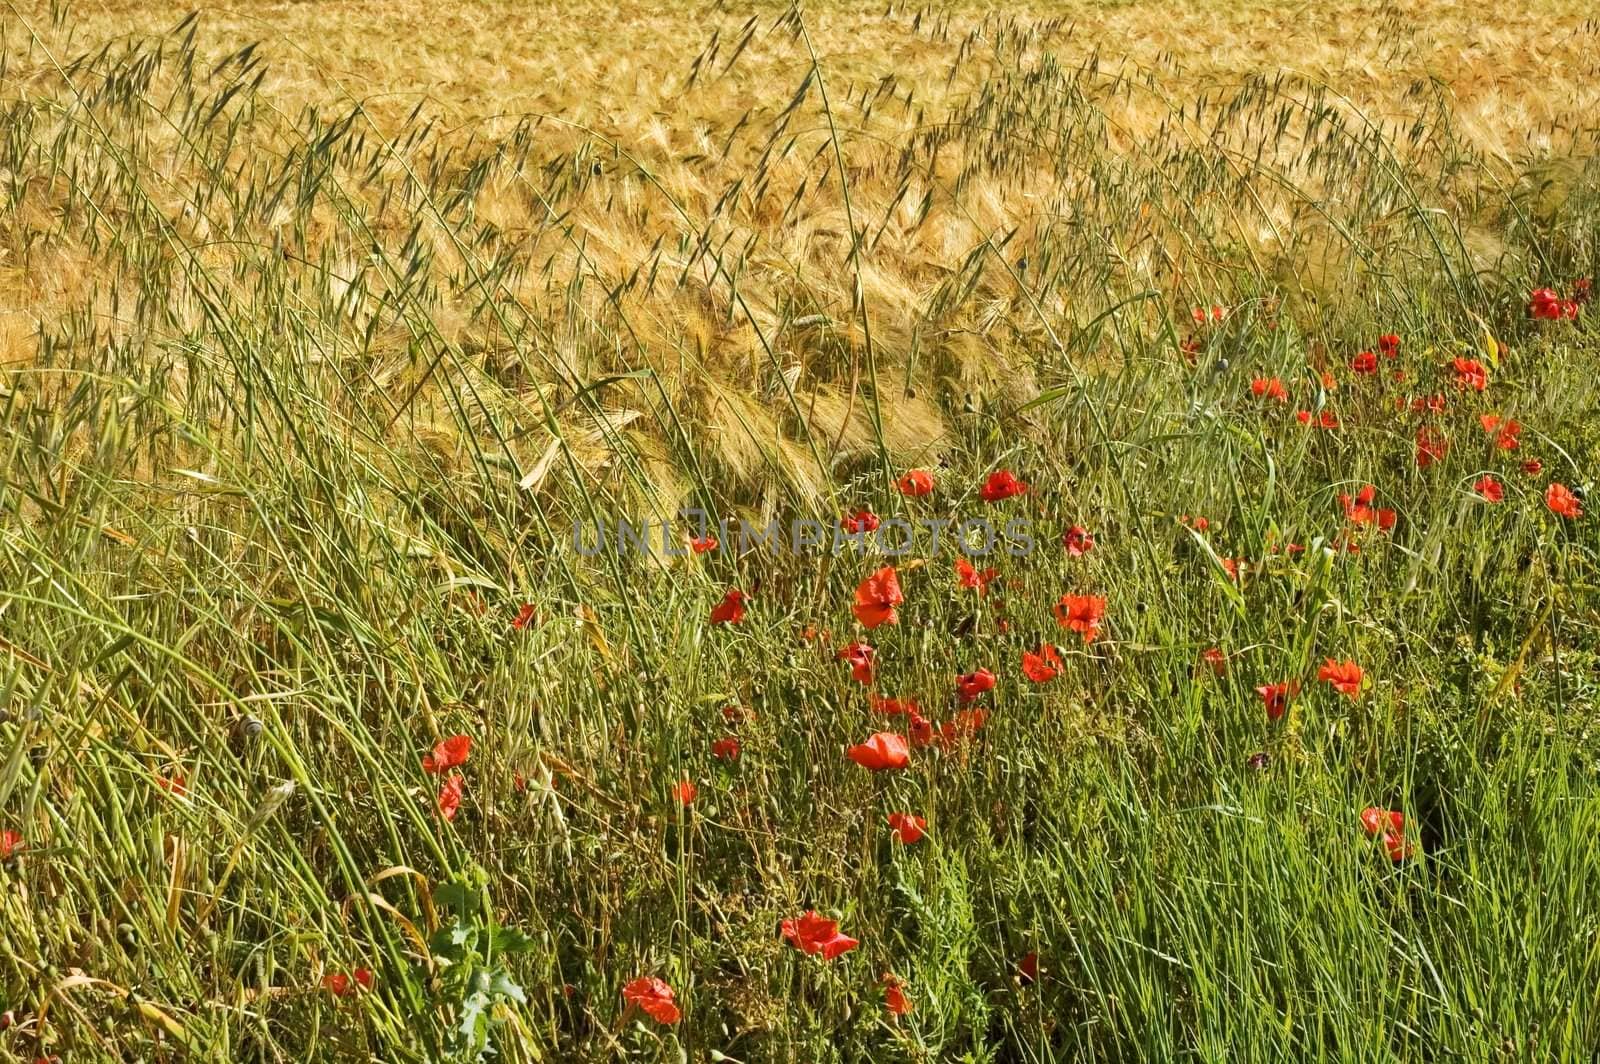 Poppies in tall grass